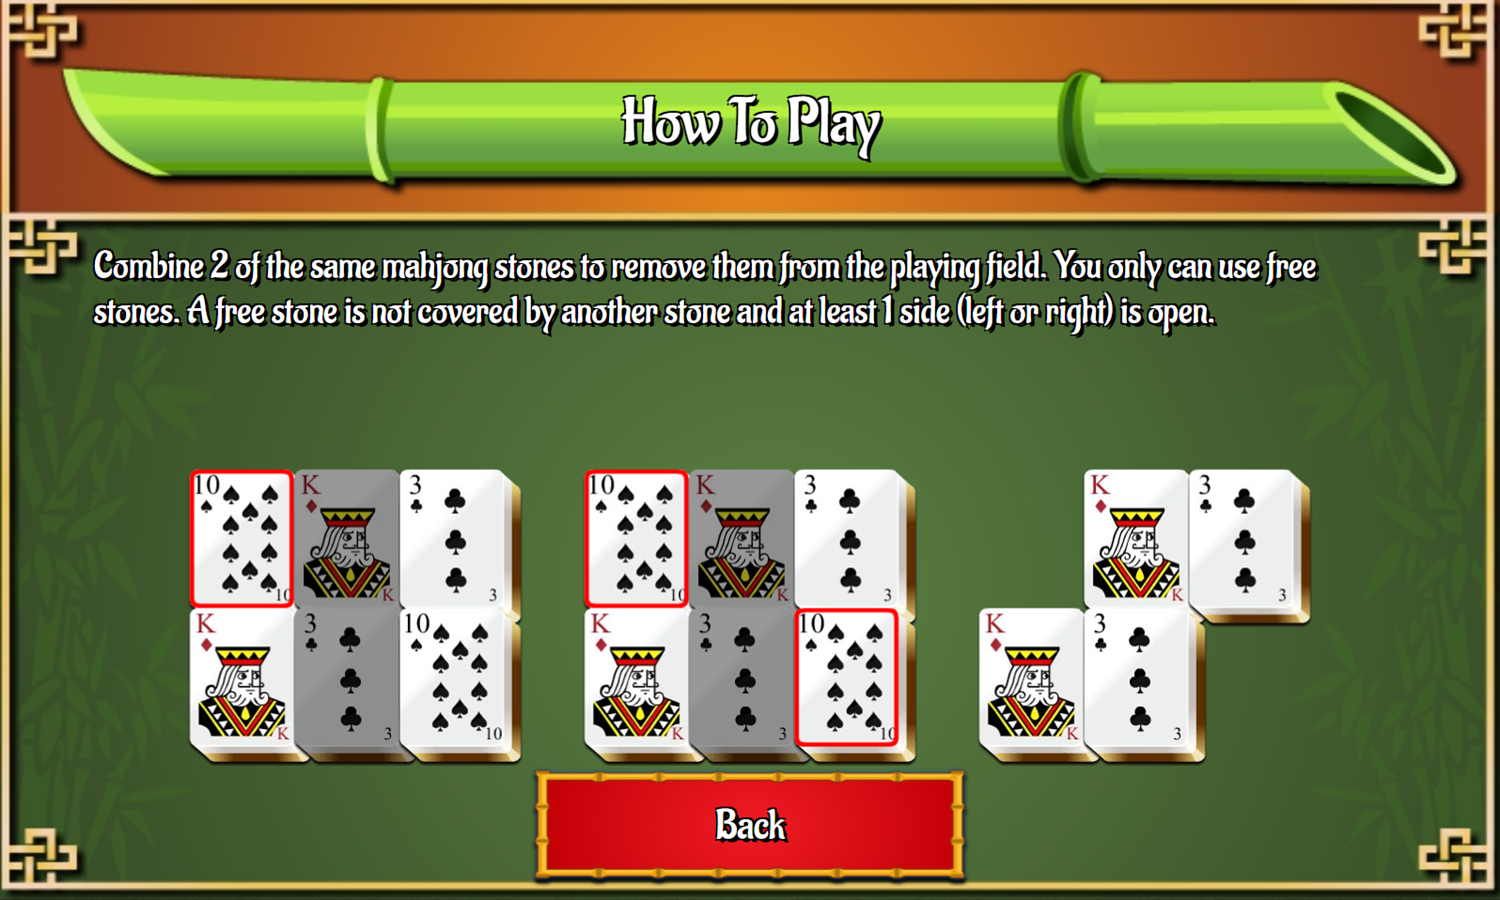 Mahjong Card Solitaire Game How To Play Screenshot.